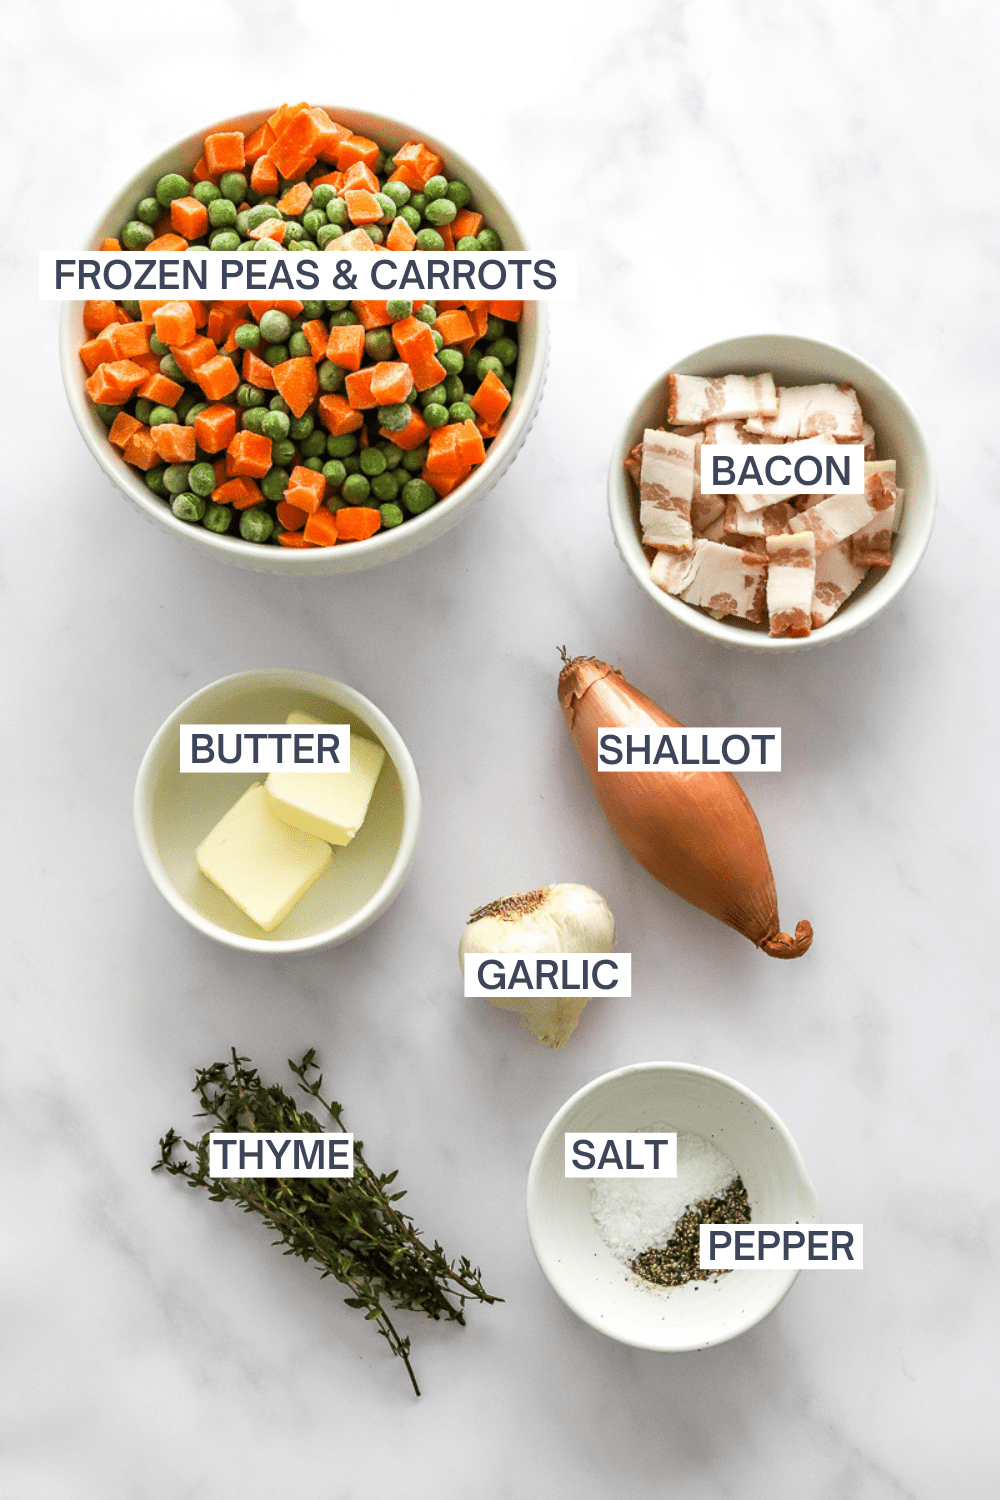 Ingredient for frozen peas and carrots with labels over each ingredient.